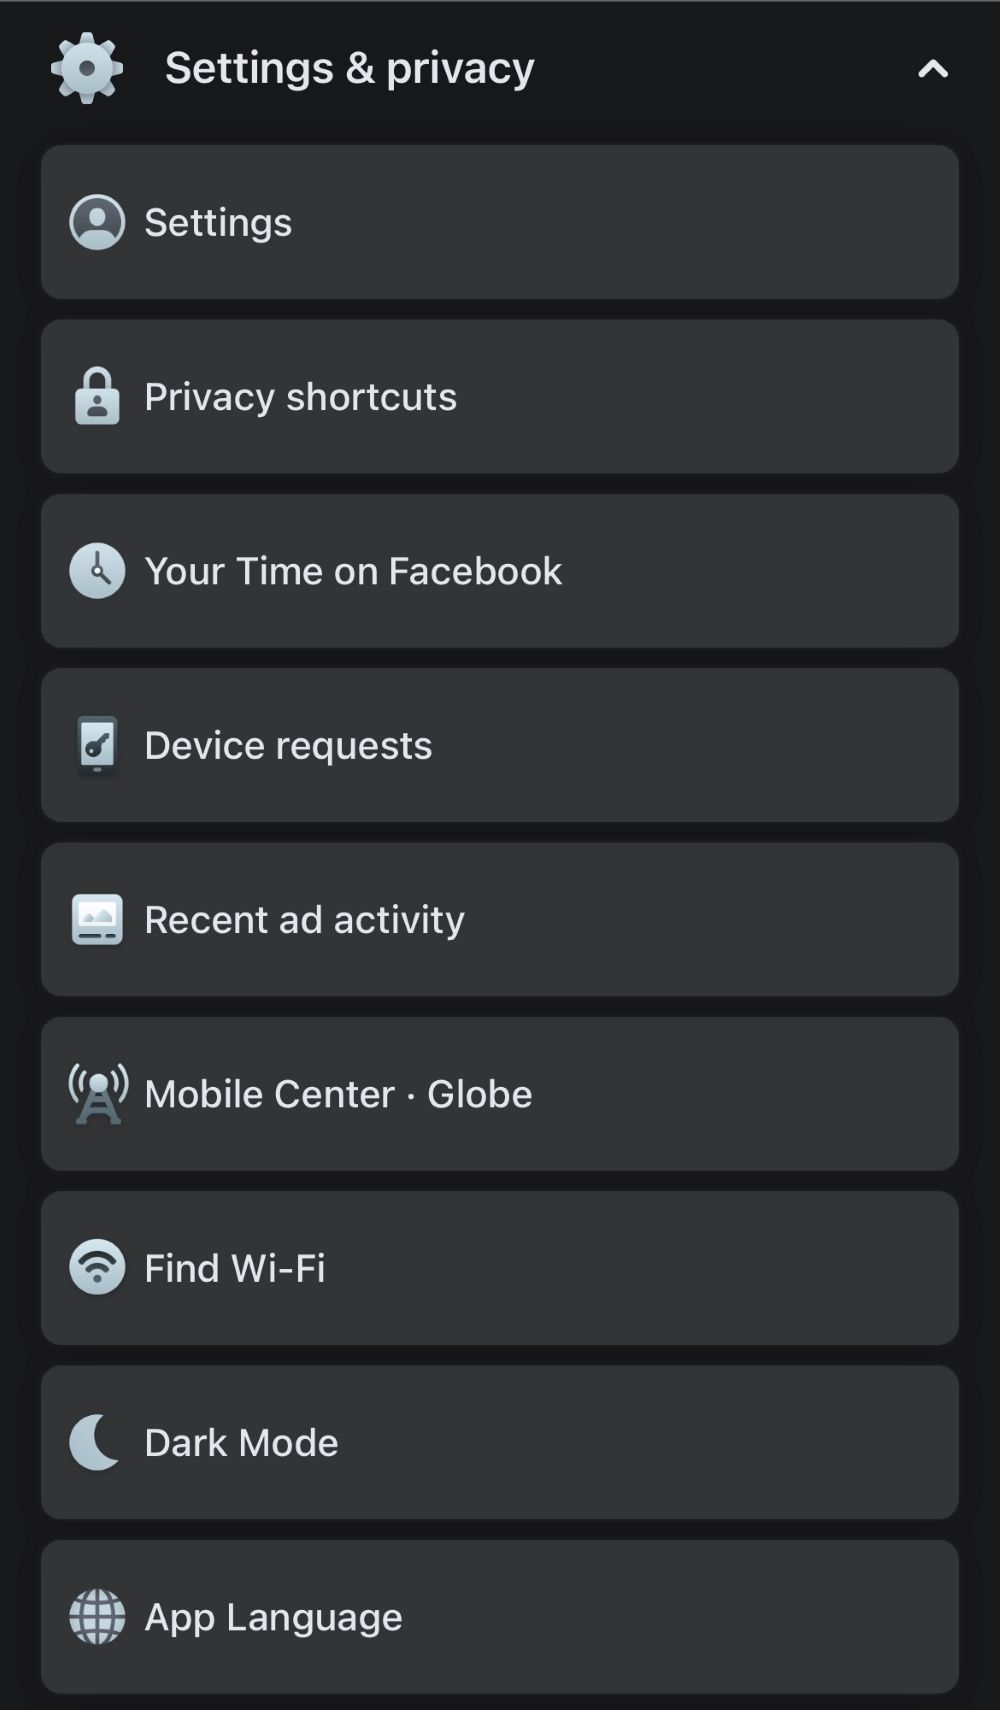 Access the Settings Page